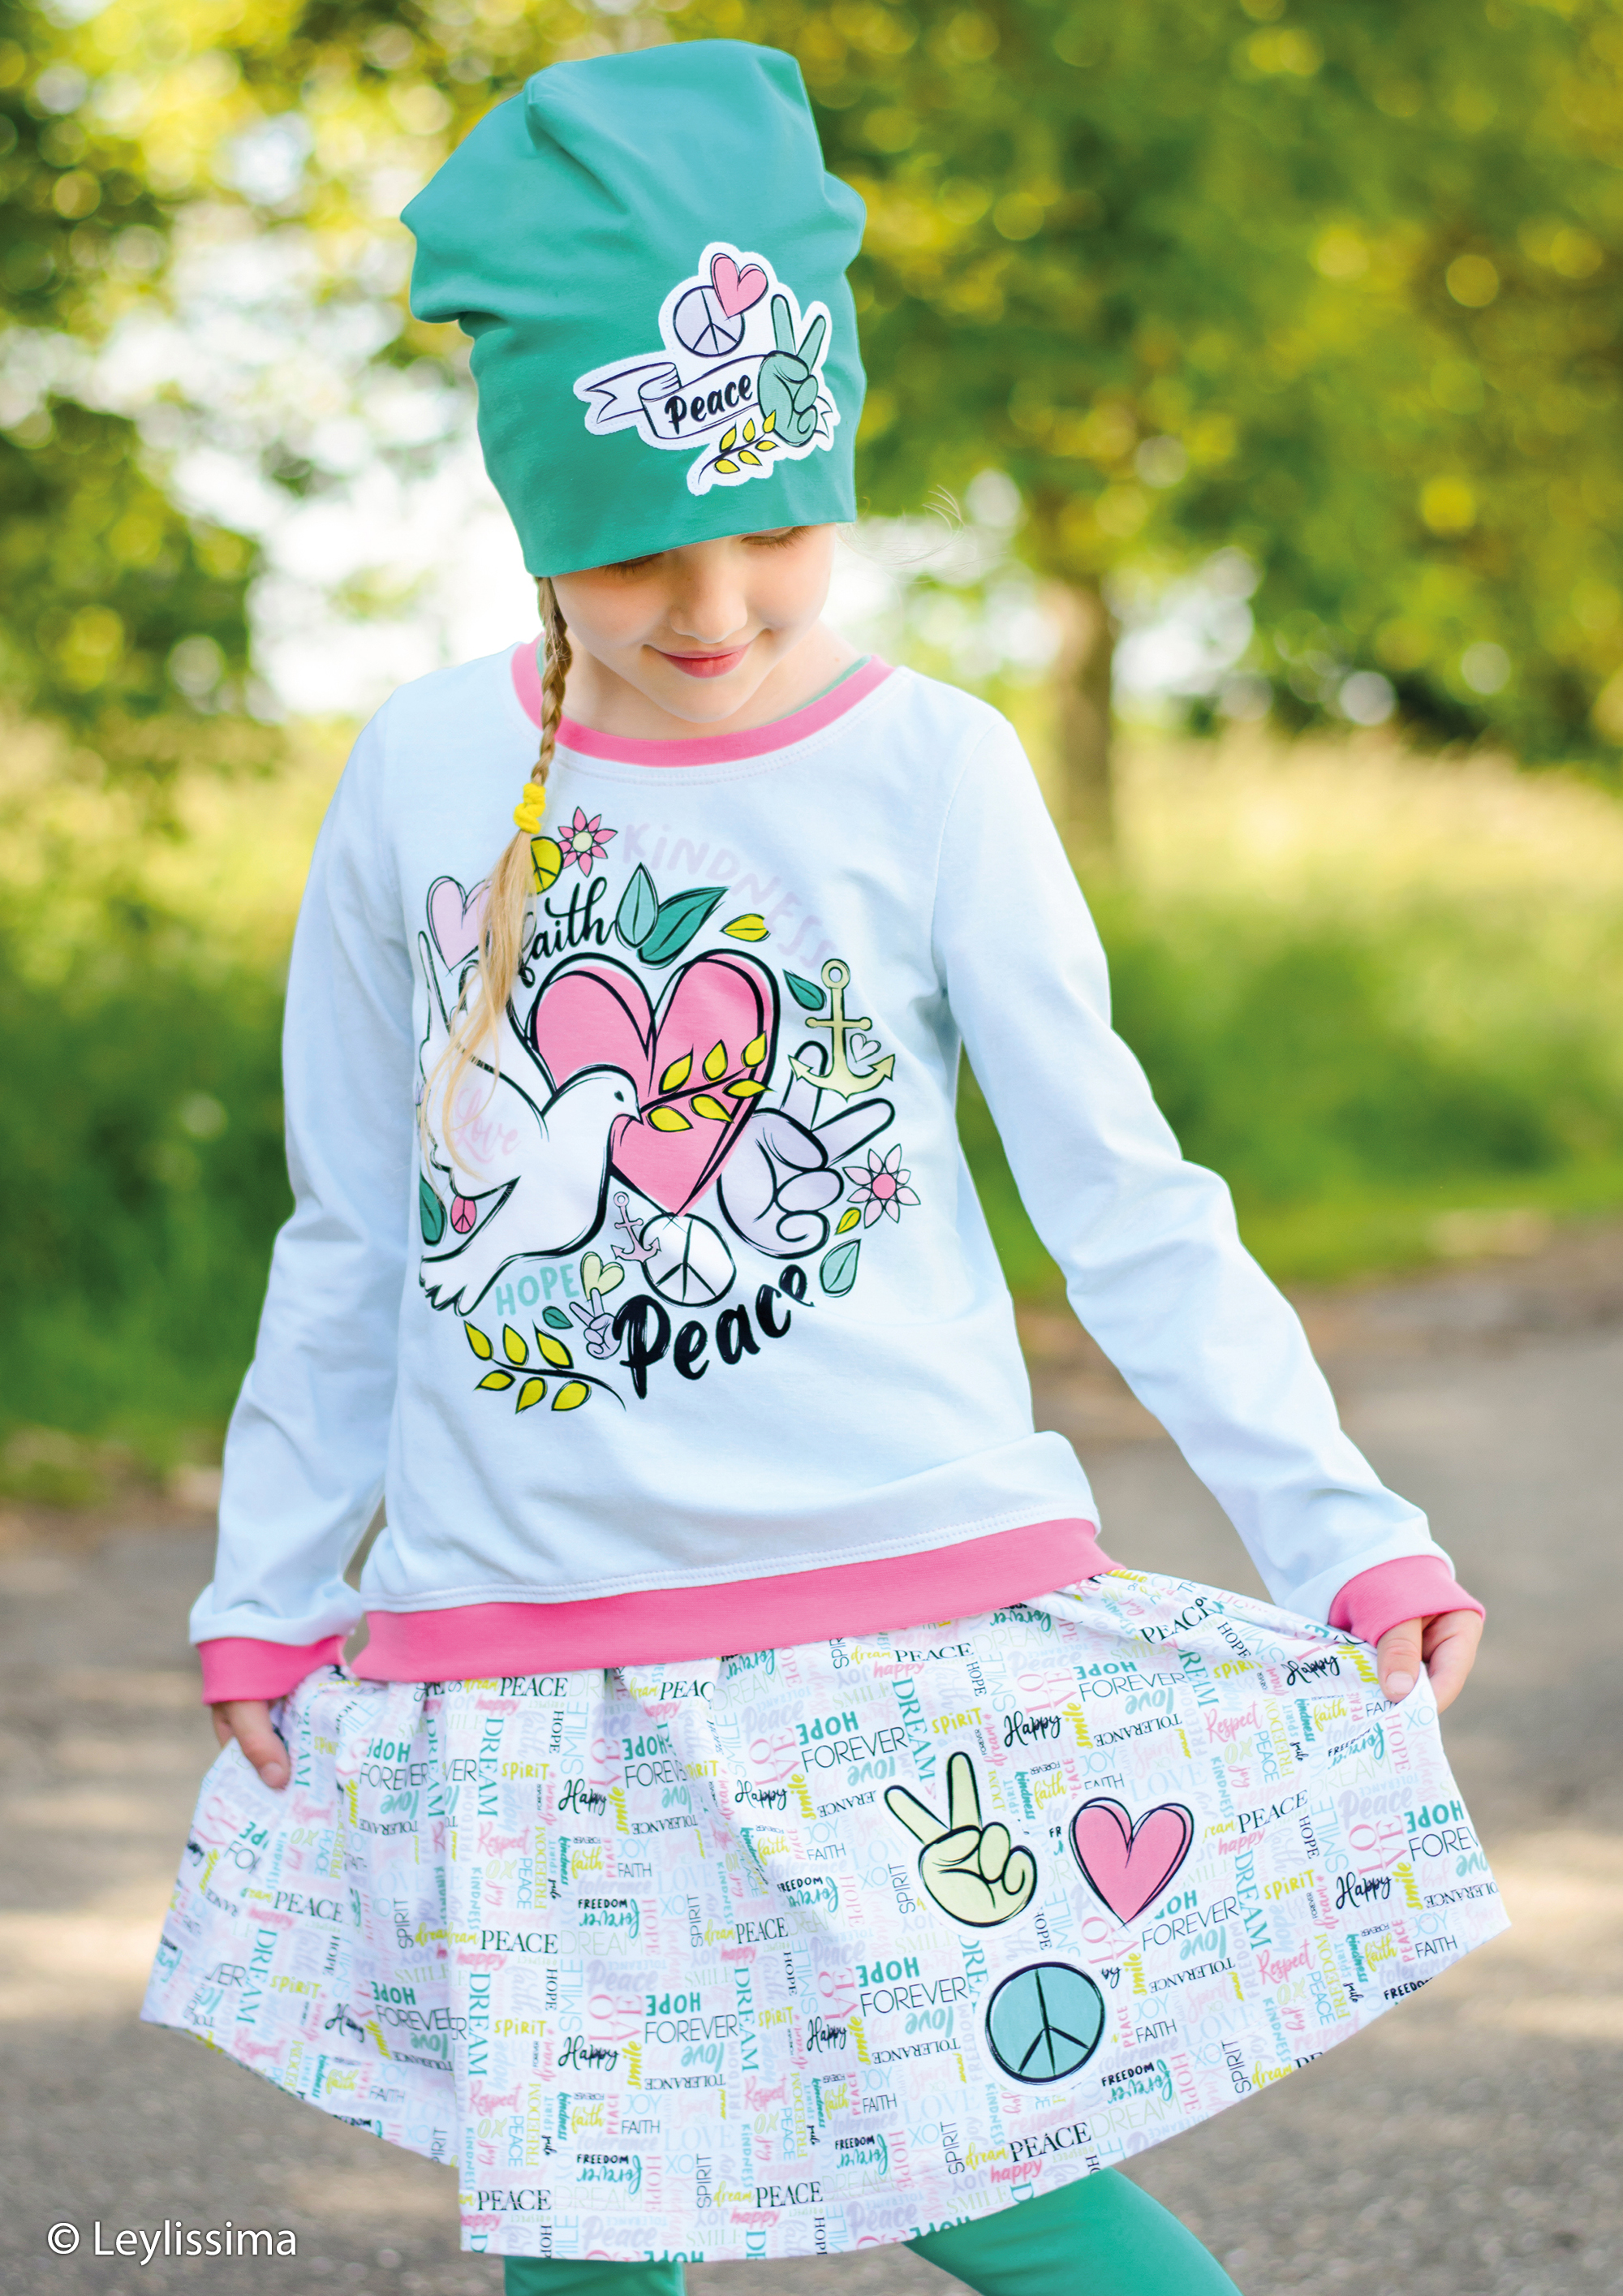 Jersey "Happy Love and Peace" von Swafing & lyckligdesign